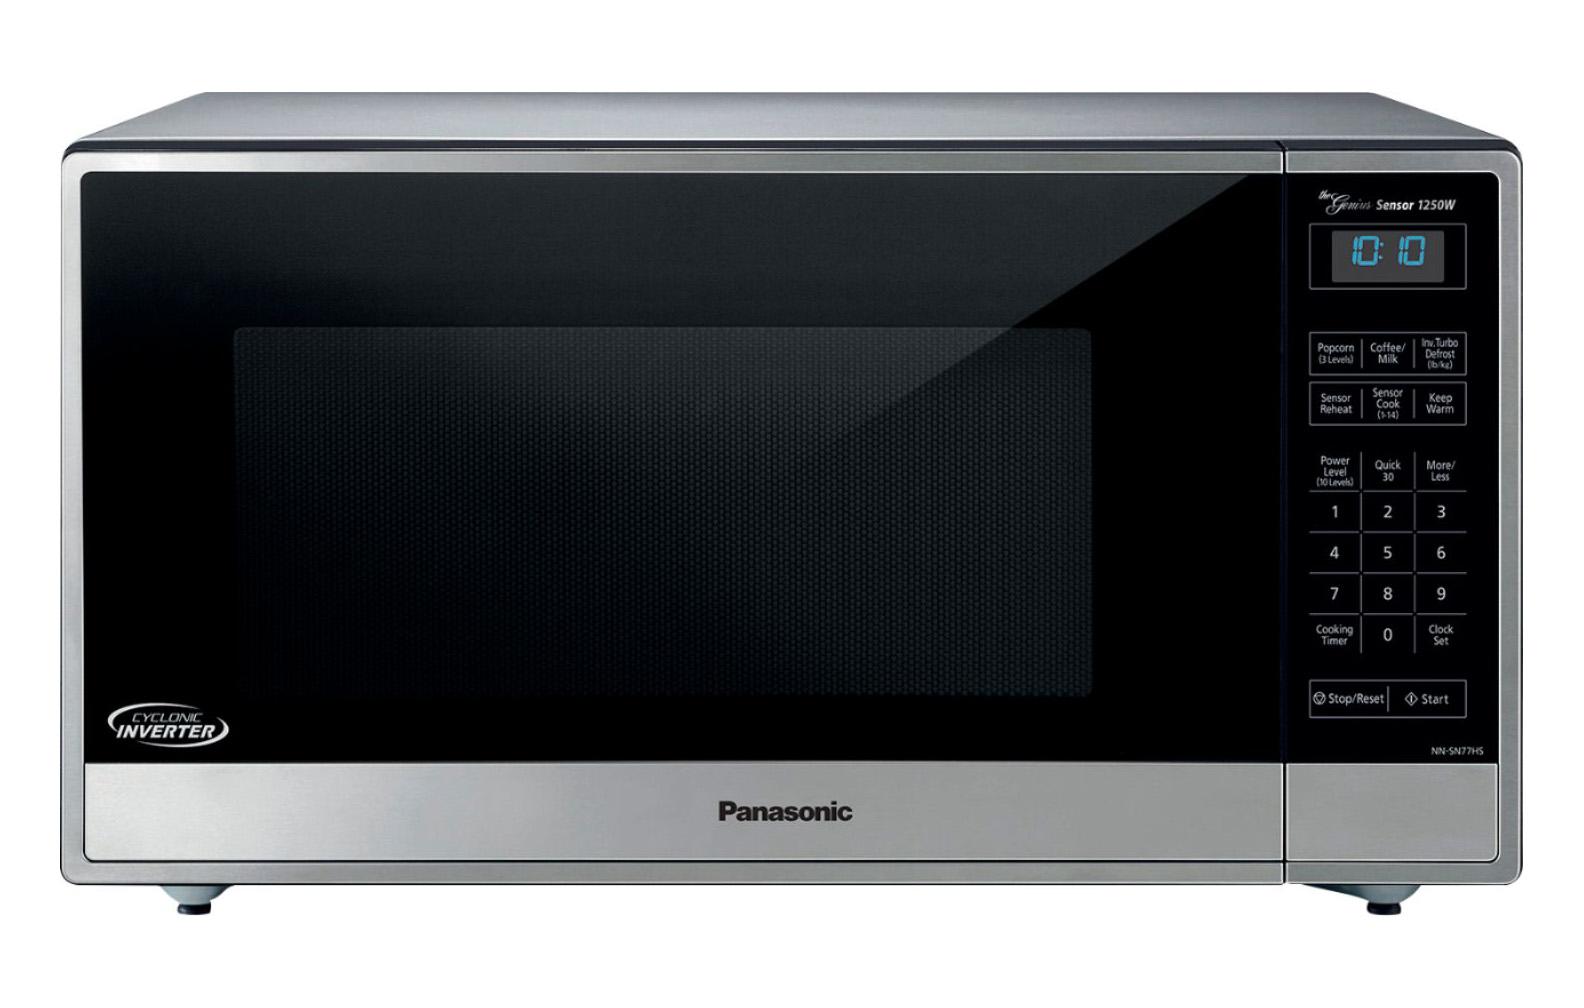 Panasonic 1.6ft 1250W Microwave for $209.99 Shipped